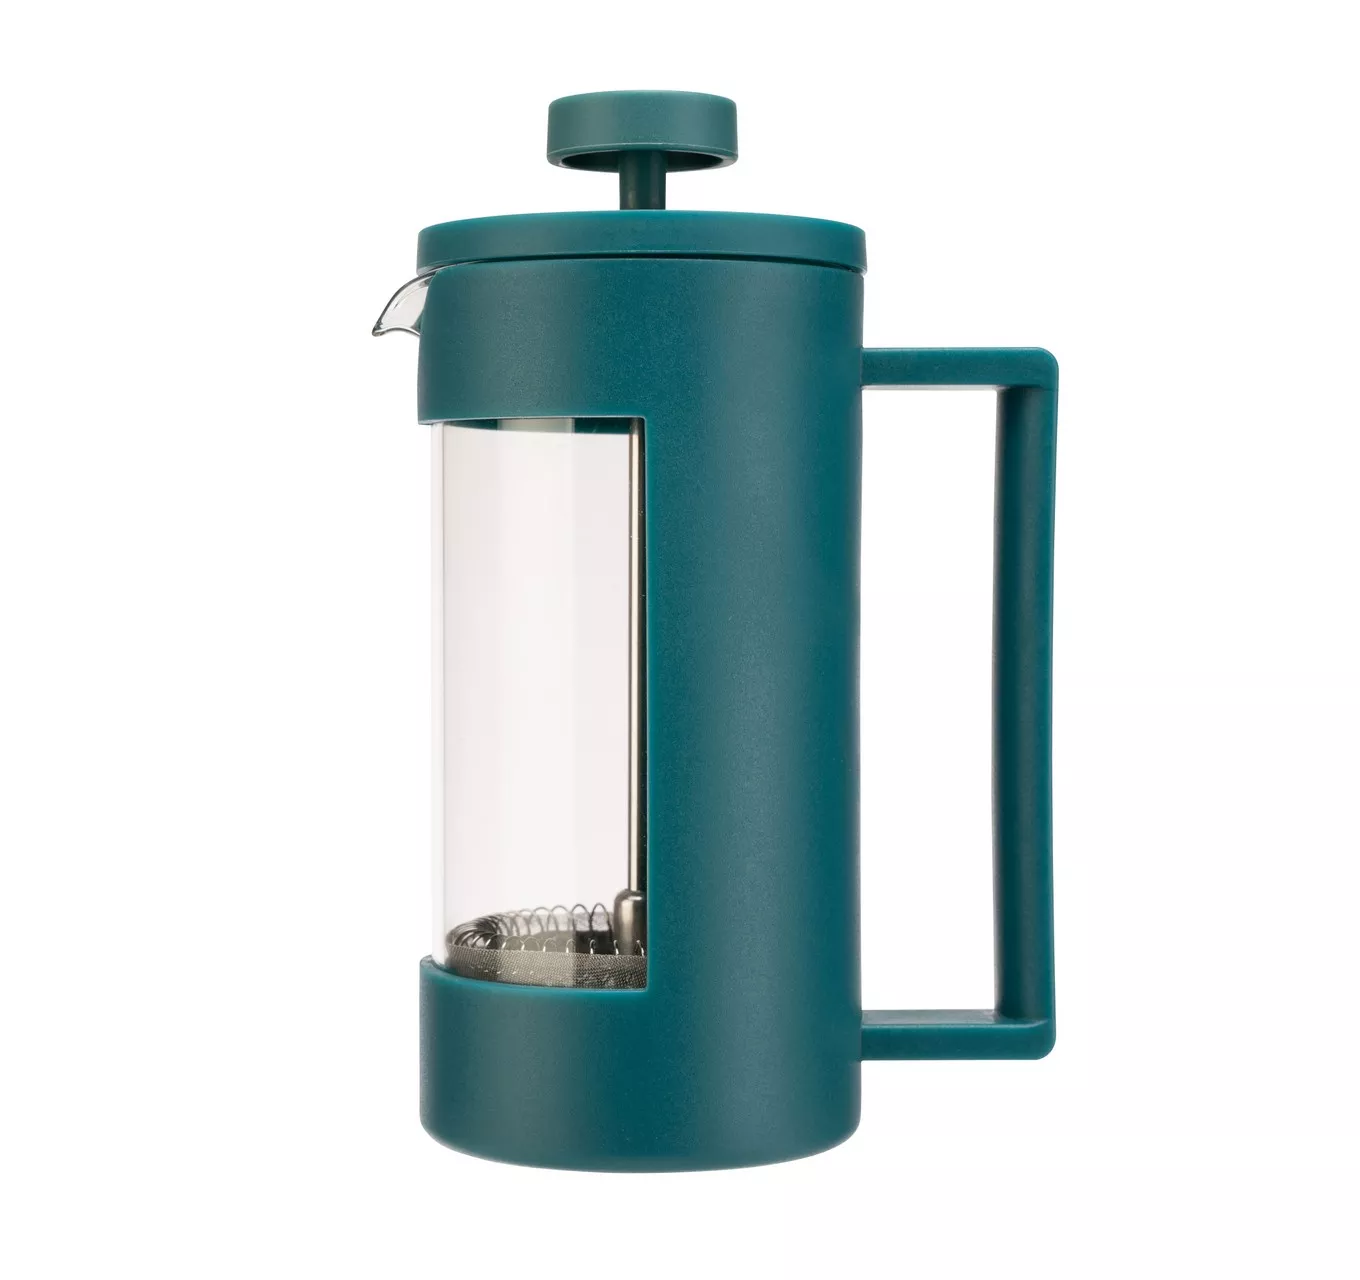 Cafetiere 3 Cup - Green